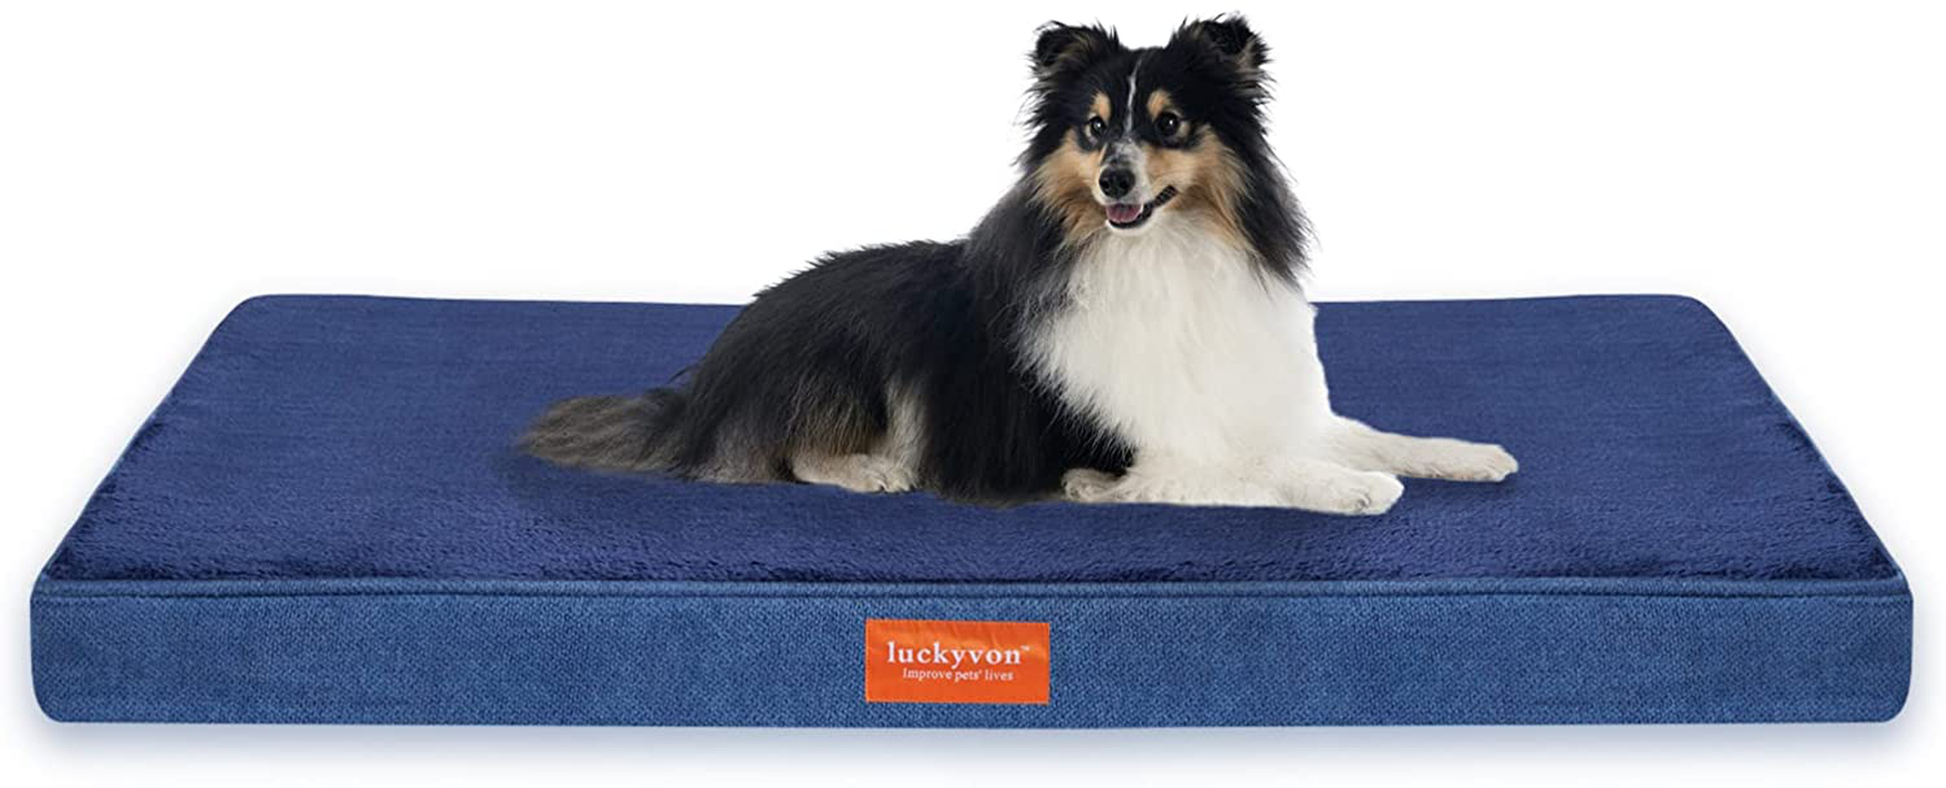 Luckyvon Large Dog Bed, Orthopedic Memory Foam Dog Bed, Large Dog Bed with Removable Plush Cover ,Waterproof Lining and Nonskid Bottom Dog Couch,Dog Mattress Suitable for 30 Lbs to 200 Lbs Animals & Pet Supplies > Pet Supplies > Dog Supplies > Dog Beds luckyvon Blue L(35"*22"*3"in) 